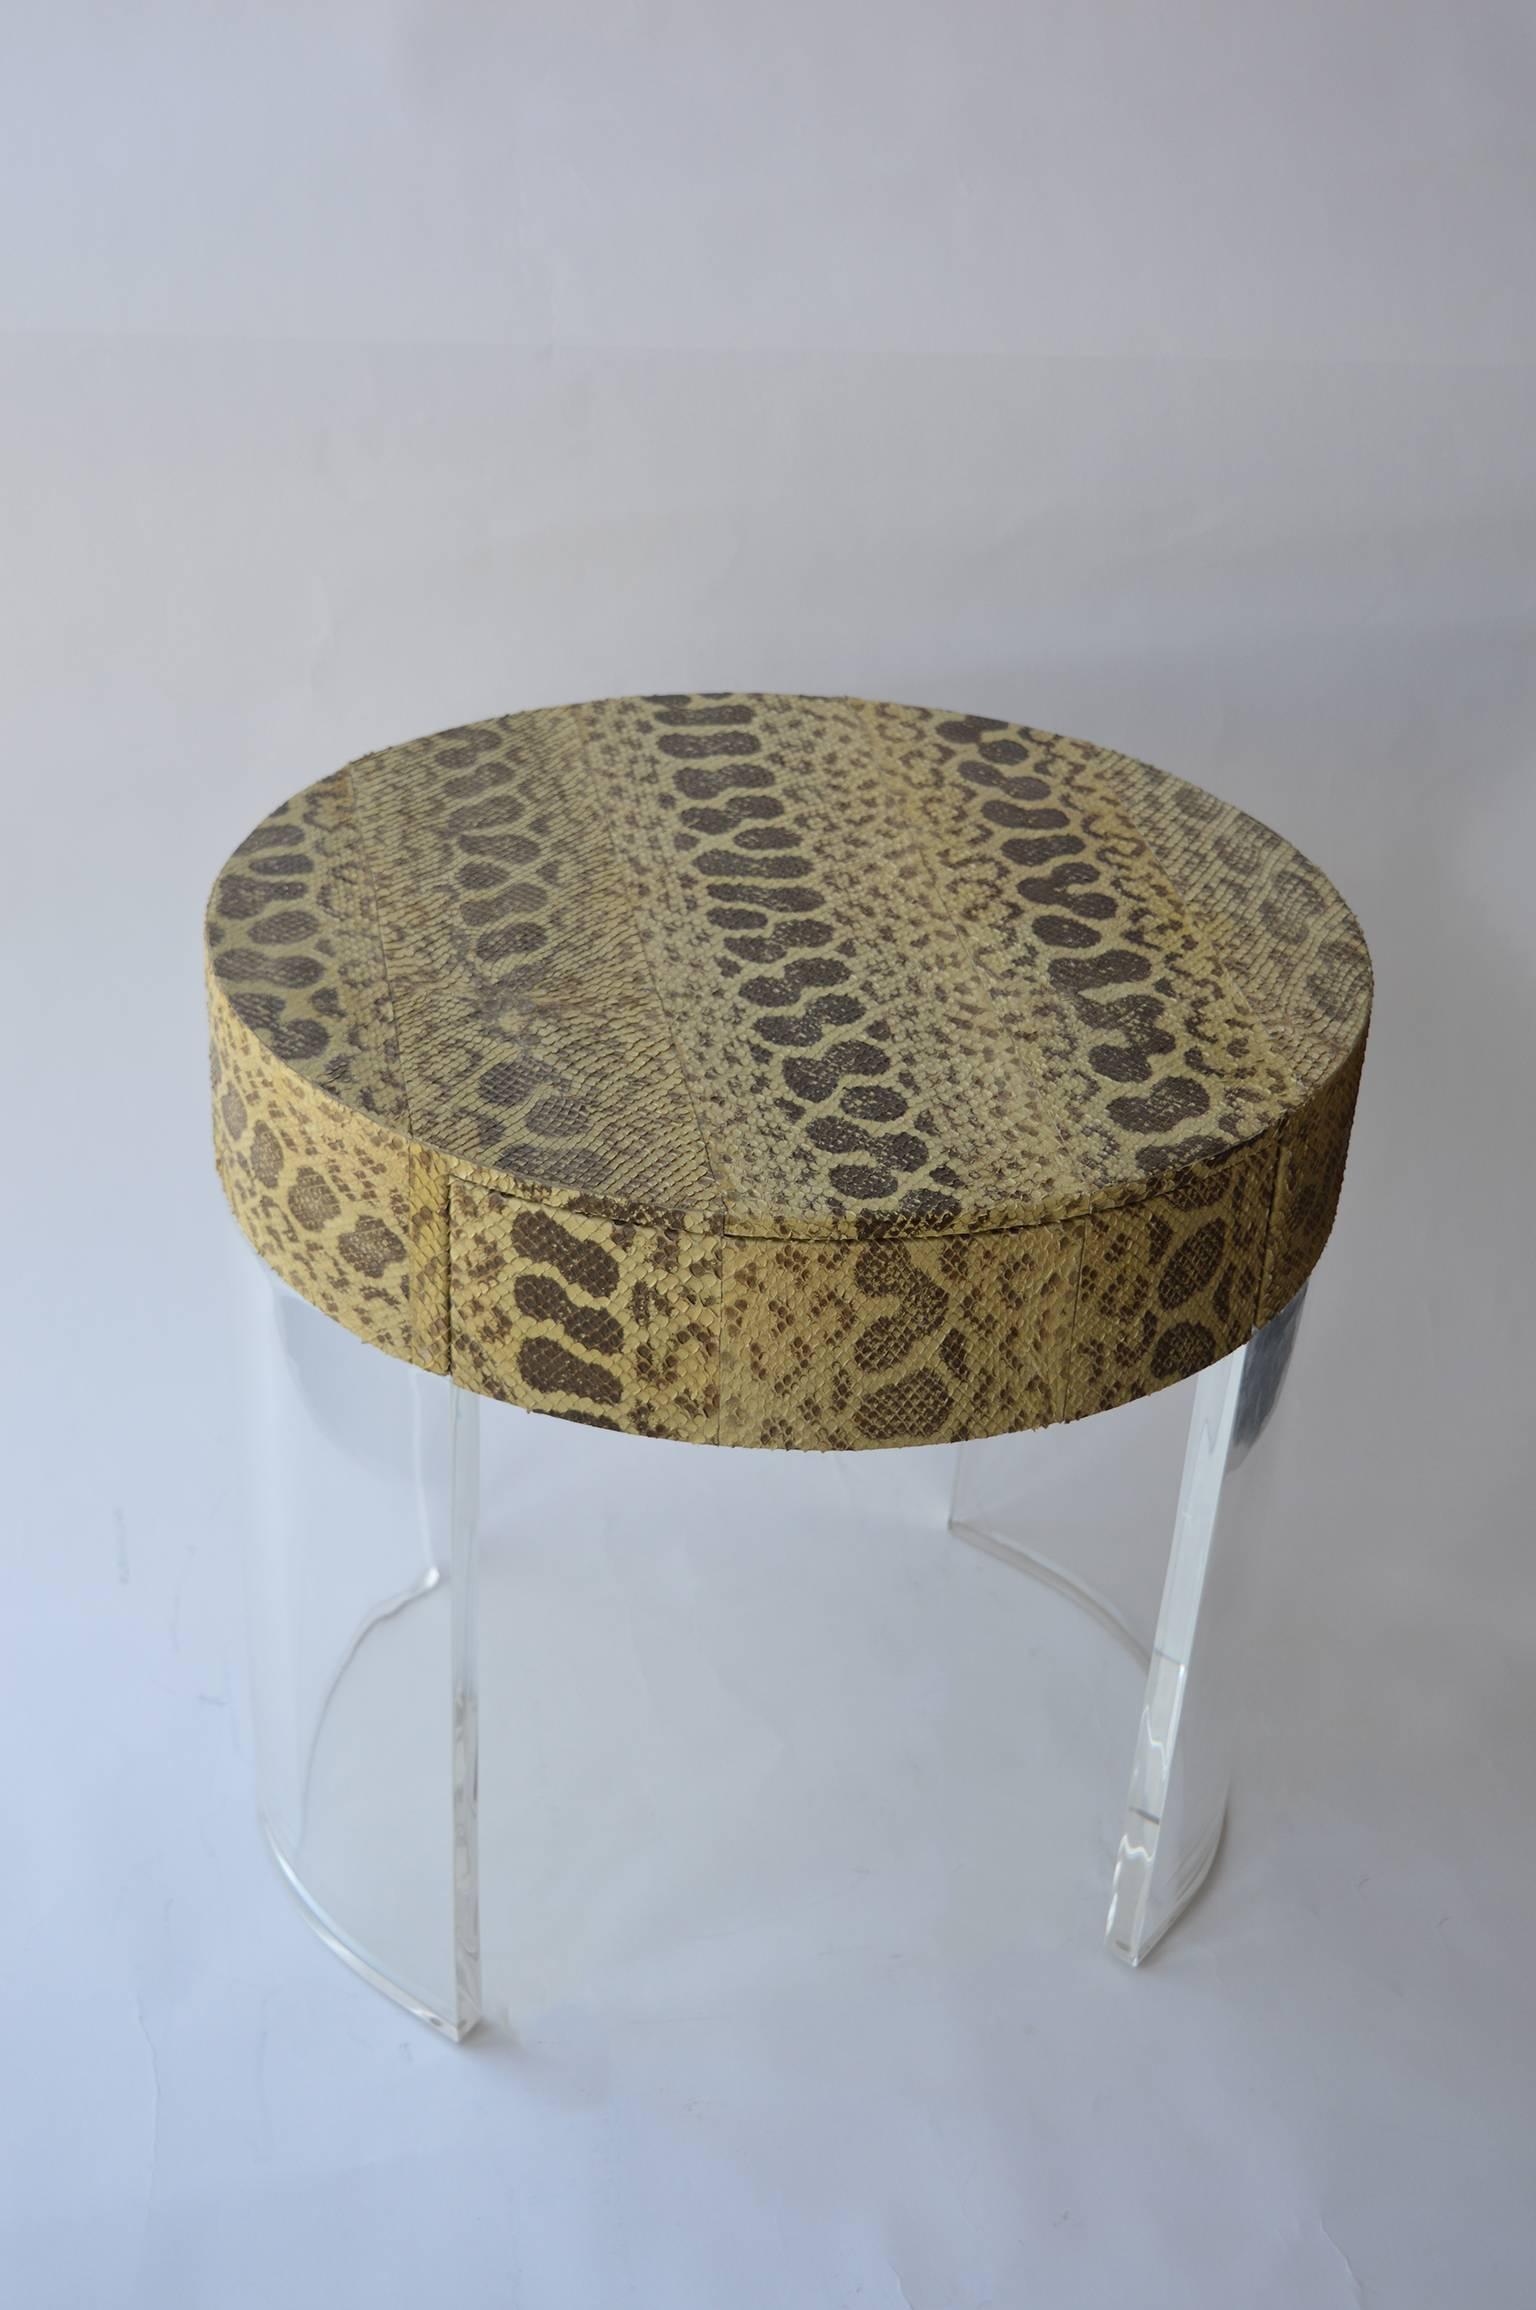 Pair of python covered side tables with drawer and acrylic legs.